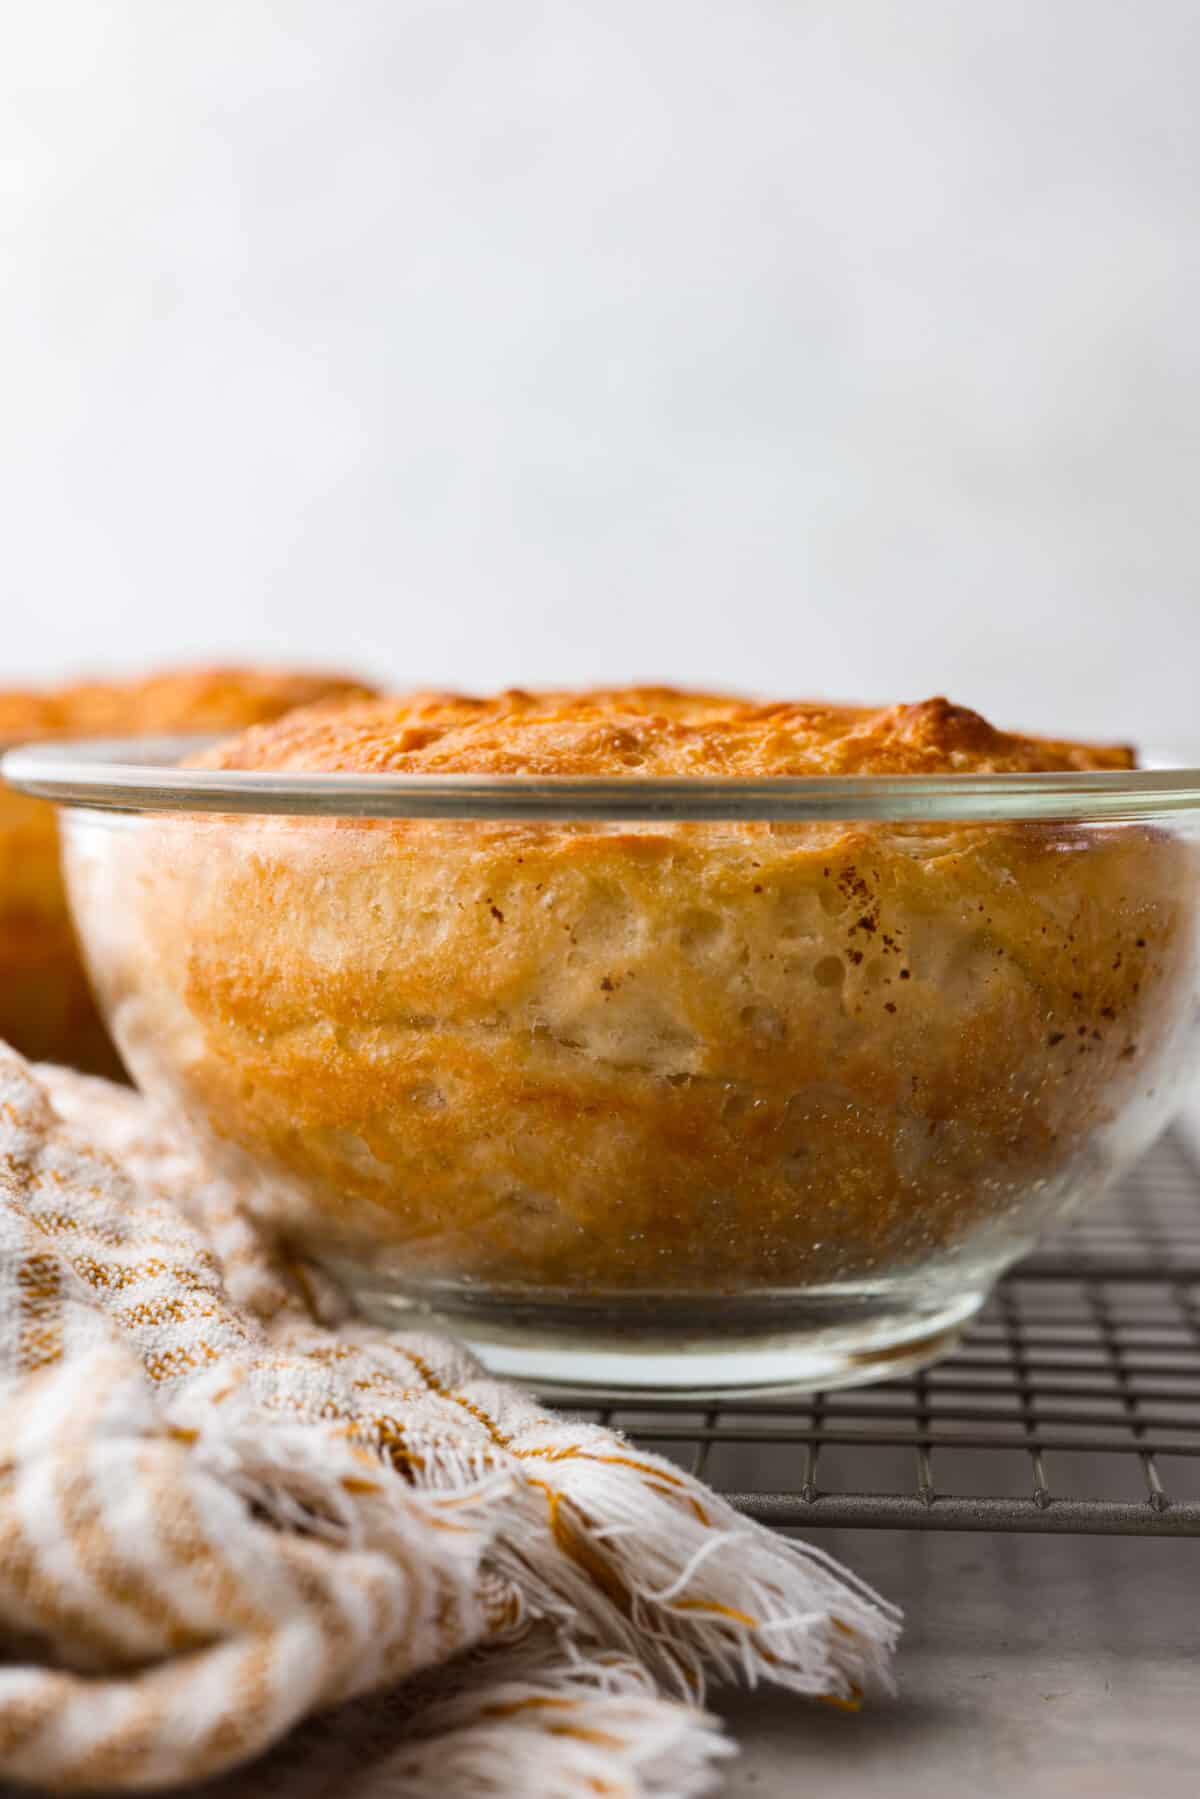 Close side view of the peasant bread baked in a glass bowl.